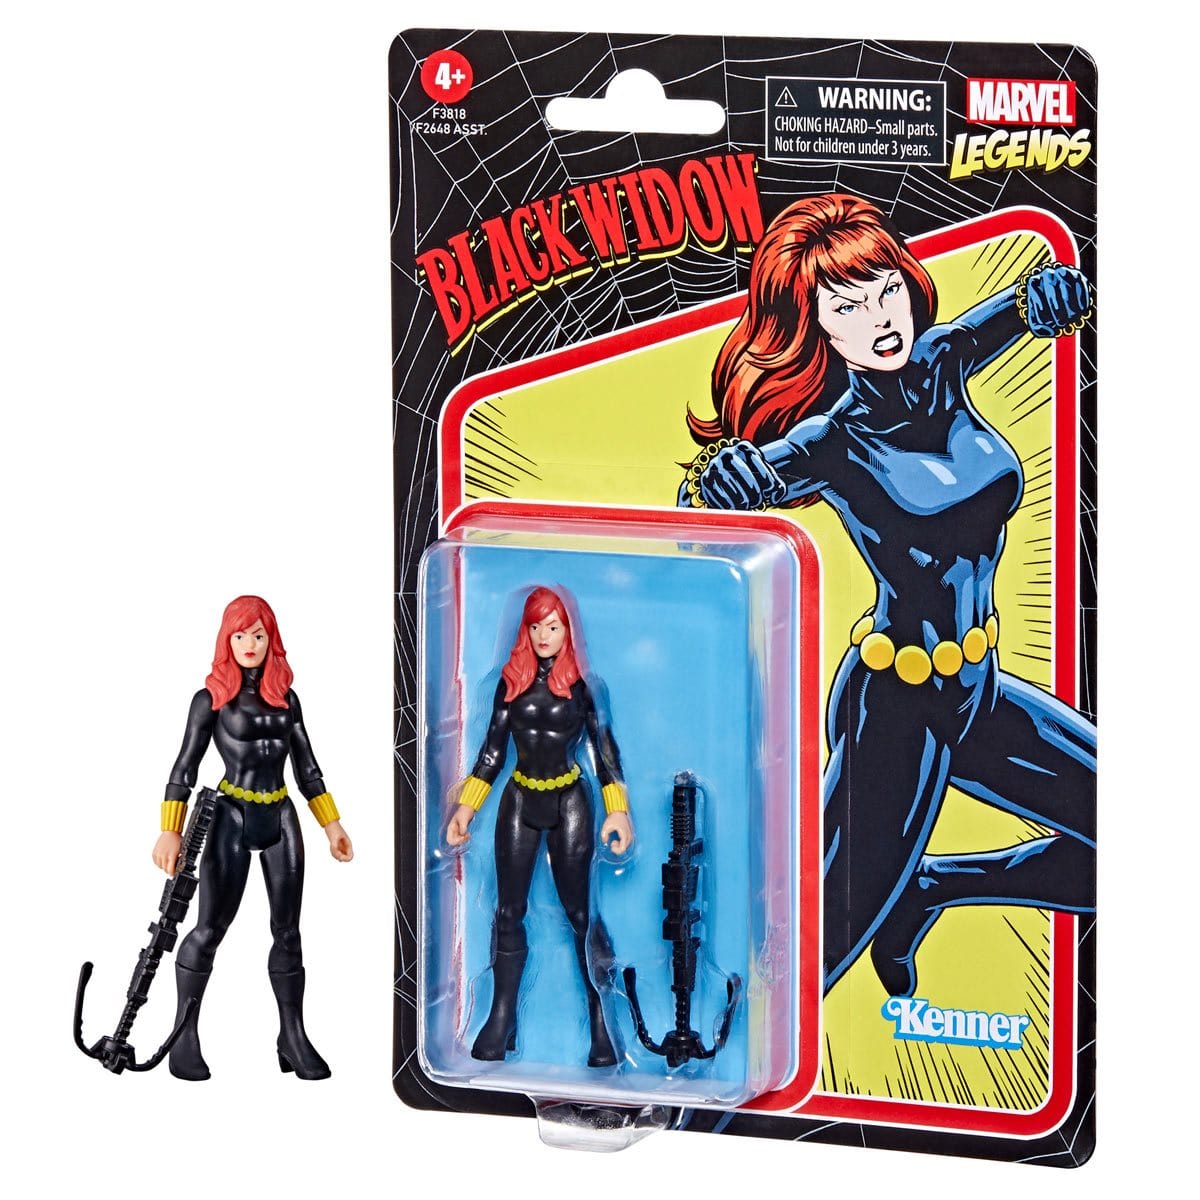 Marvel Legends Retro 375 Collection Black Widow 3 3/4-Inch Action Figure With box